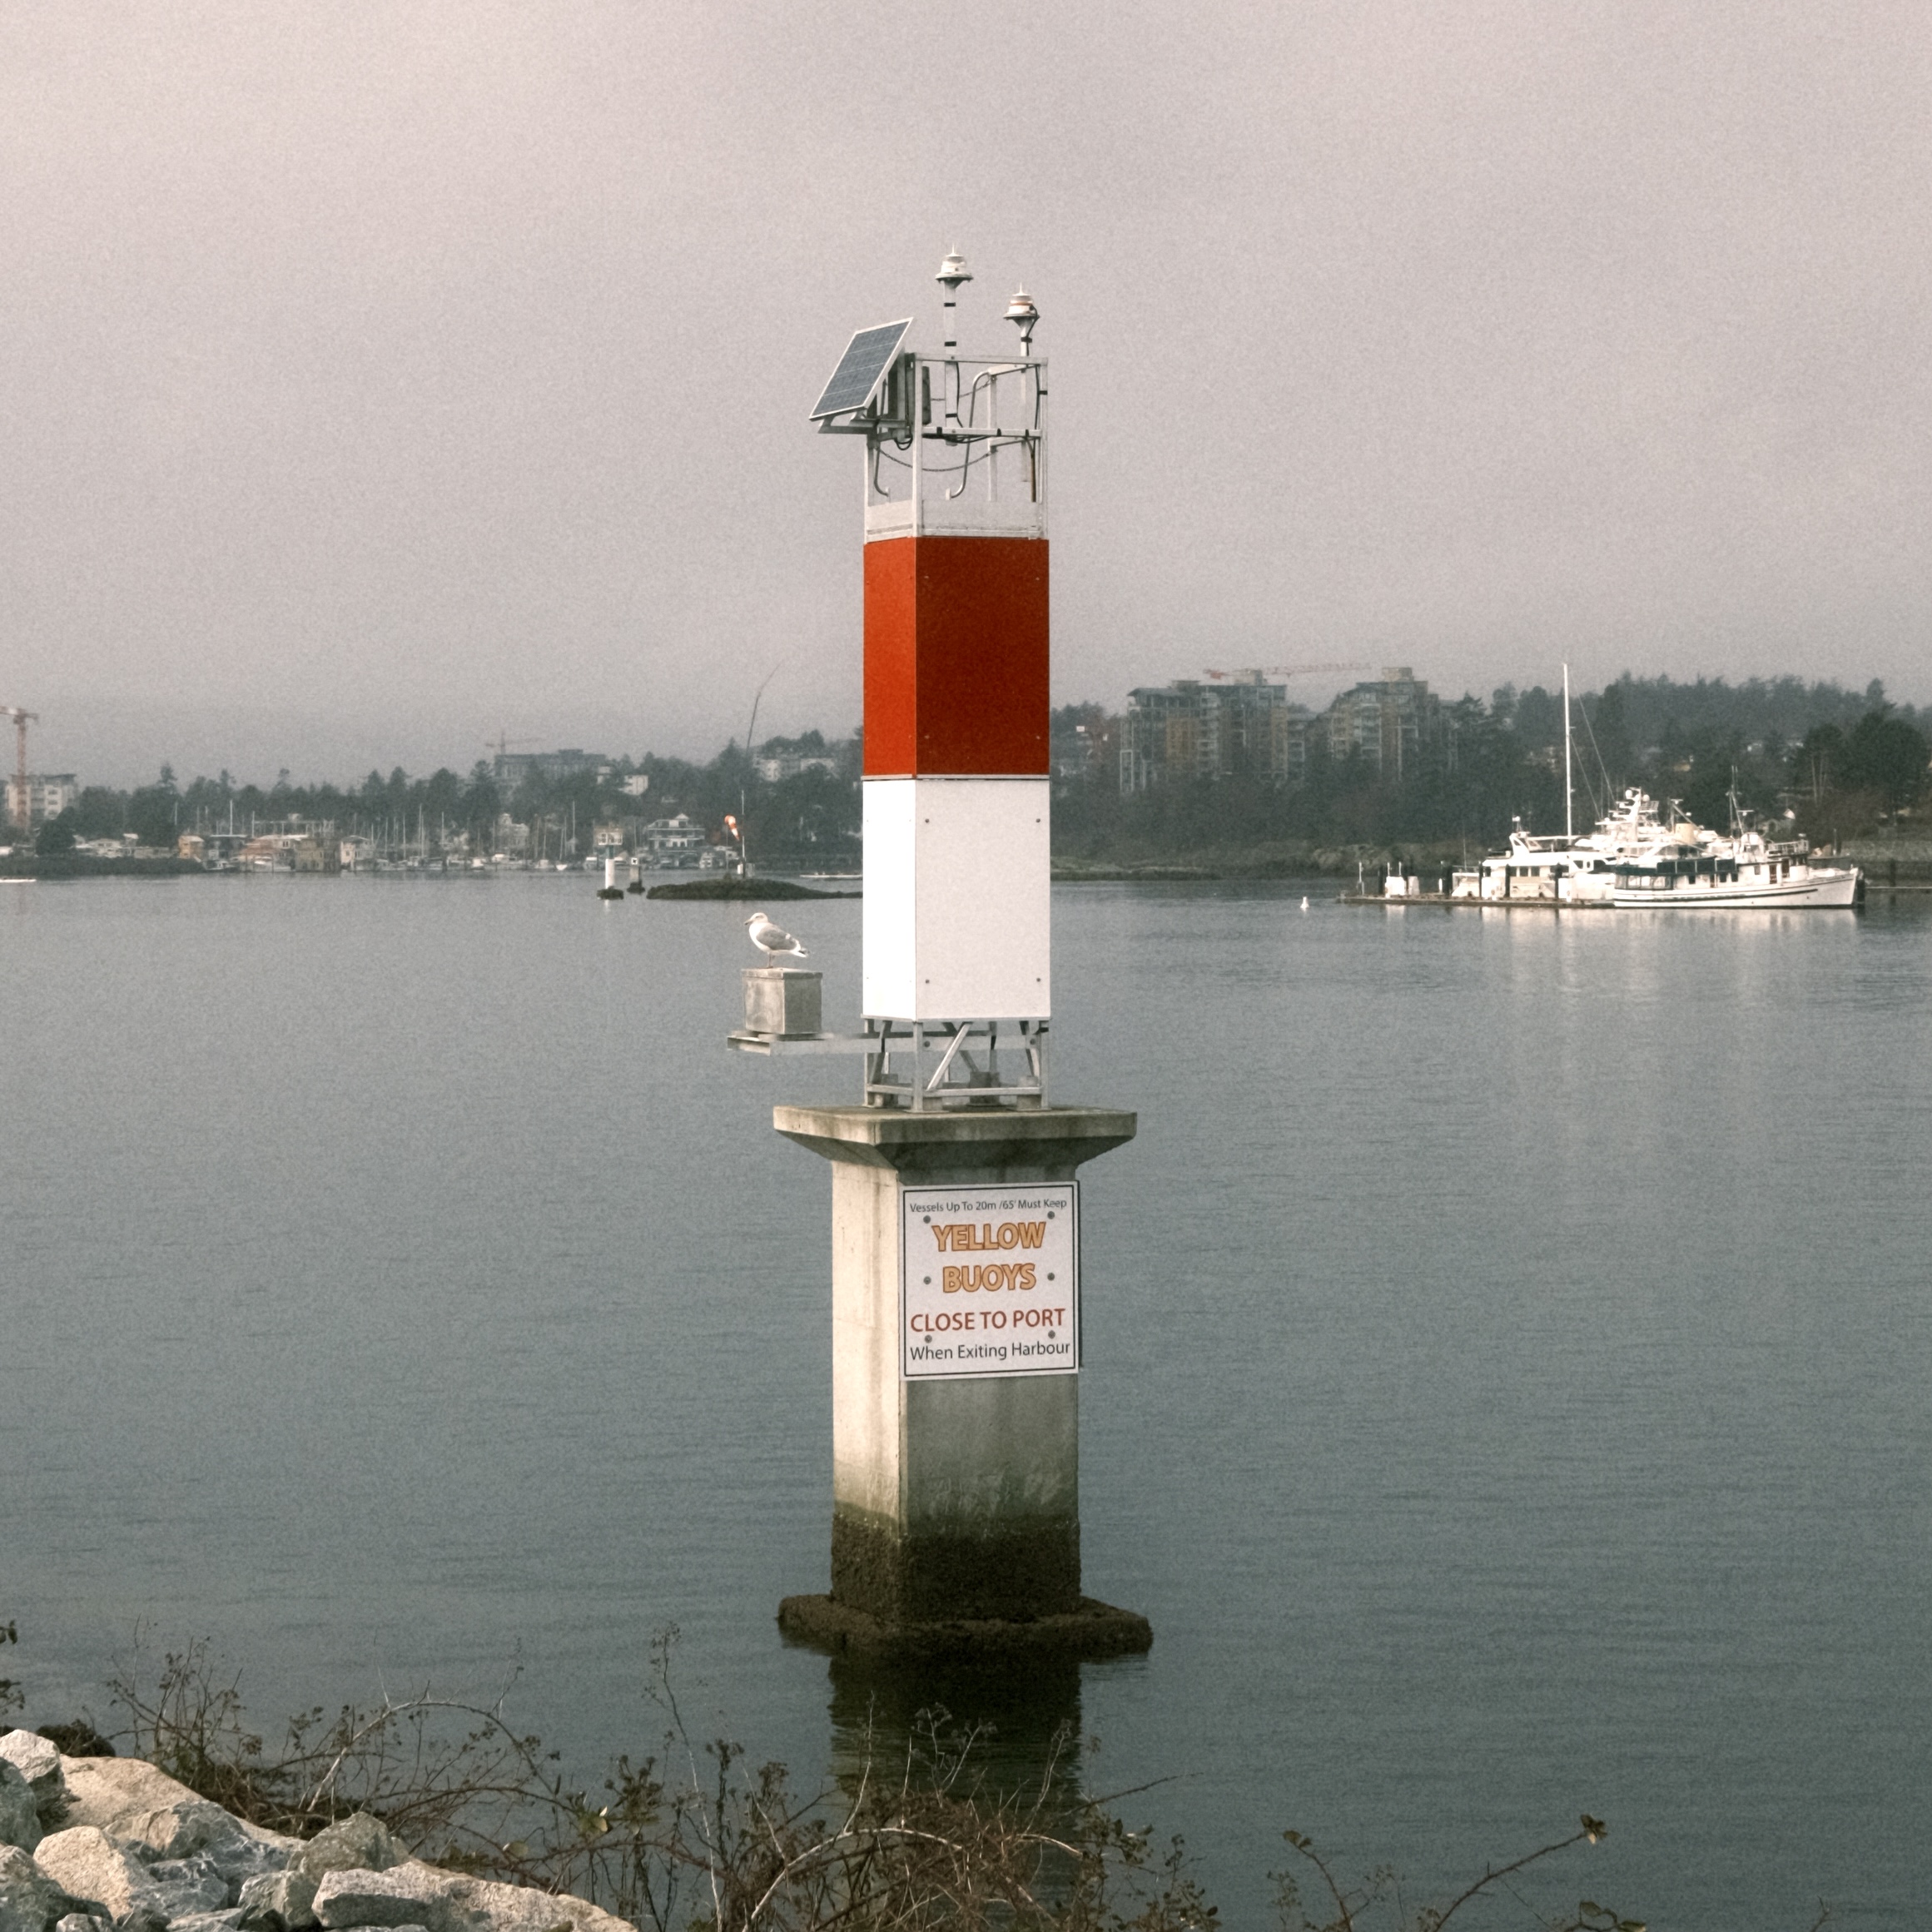 A kind of buoy in Victoria Harbour, Victoria, BC.